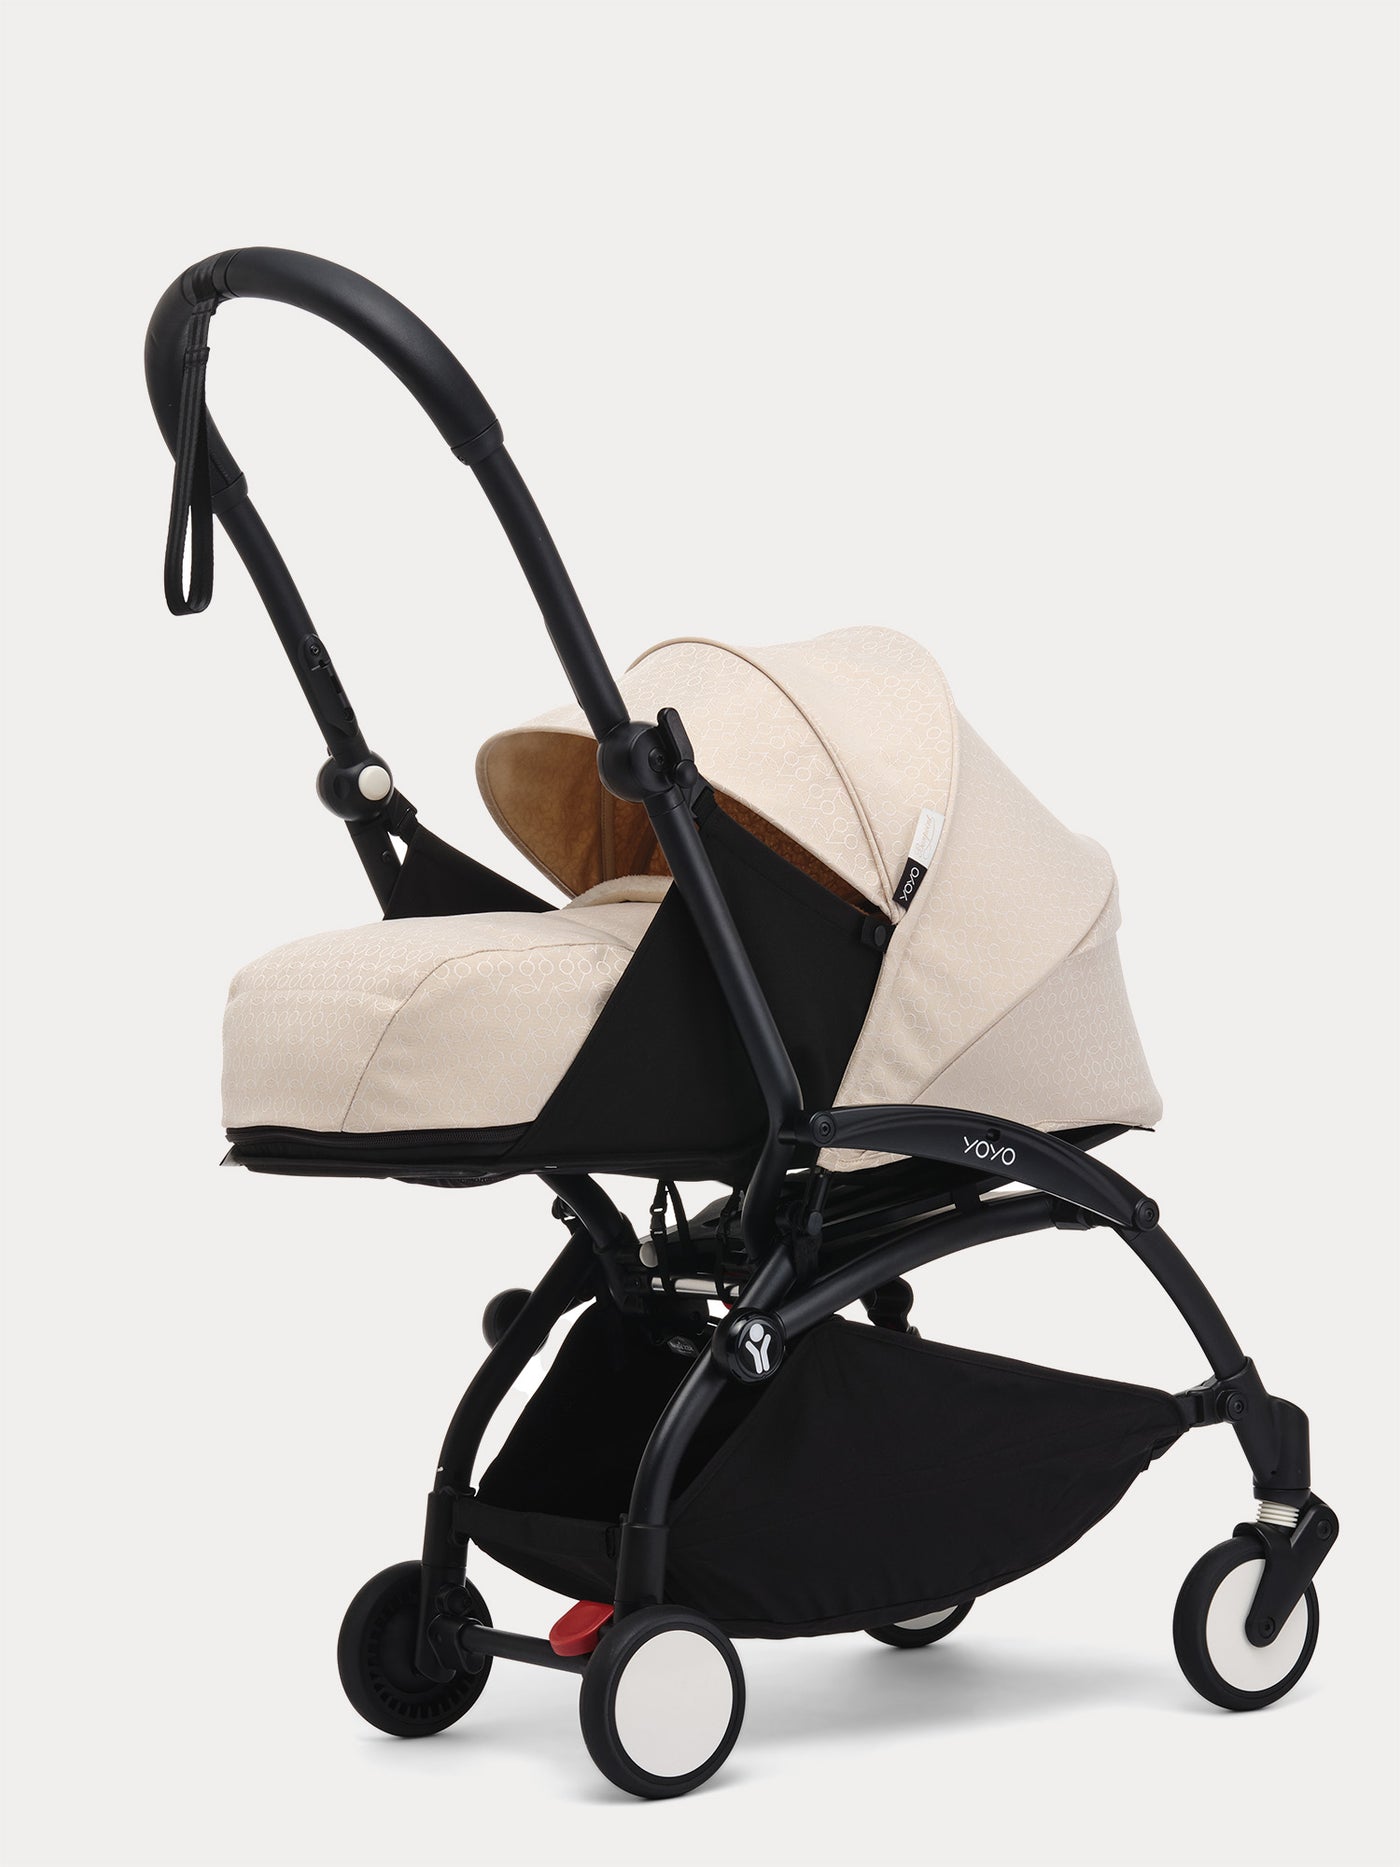 Frame stroller from birth to early childhood Bonpoint x YOYO®